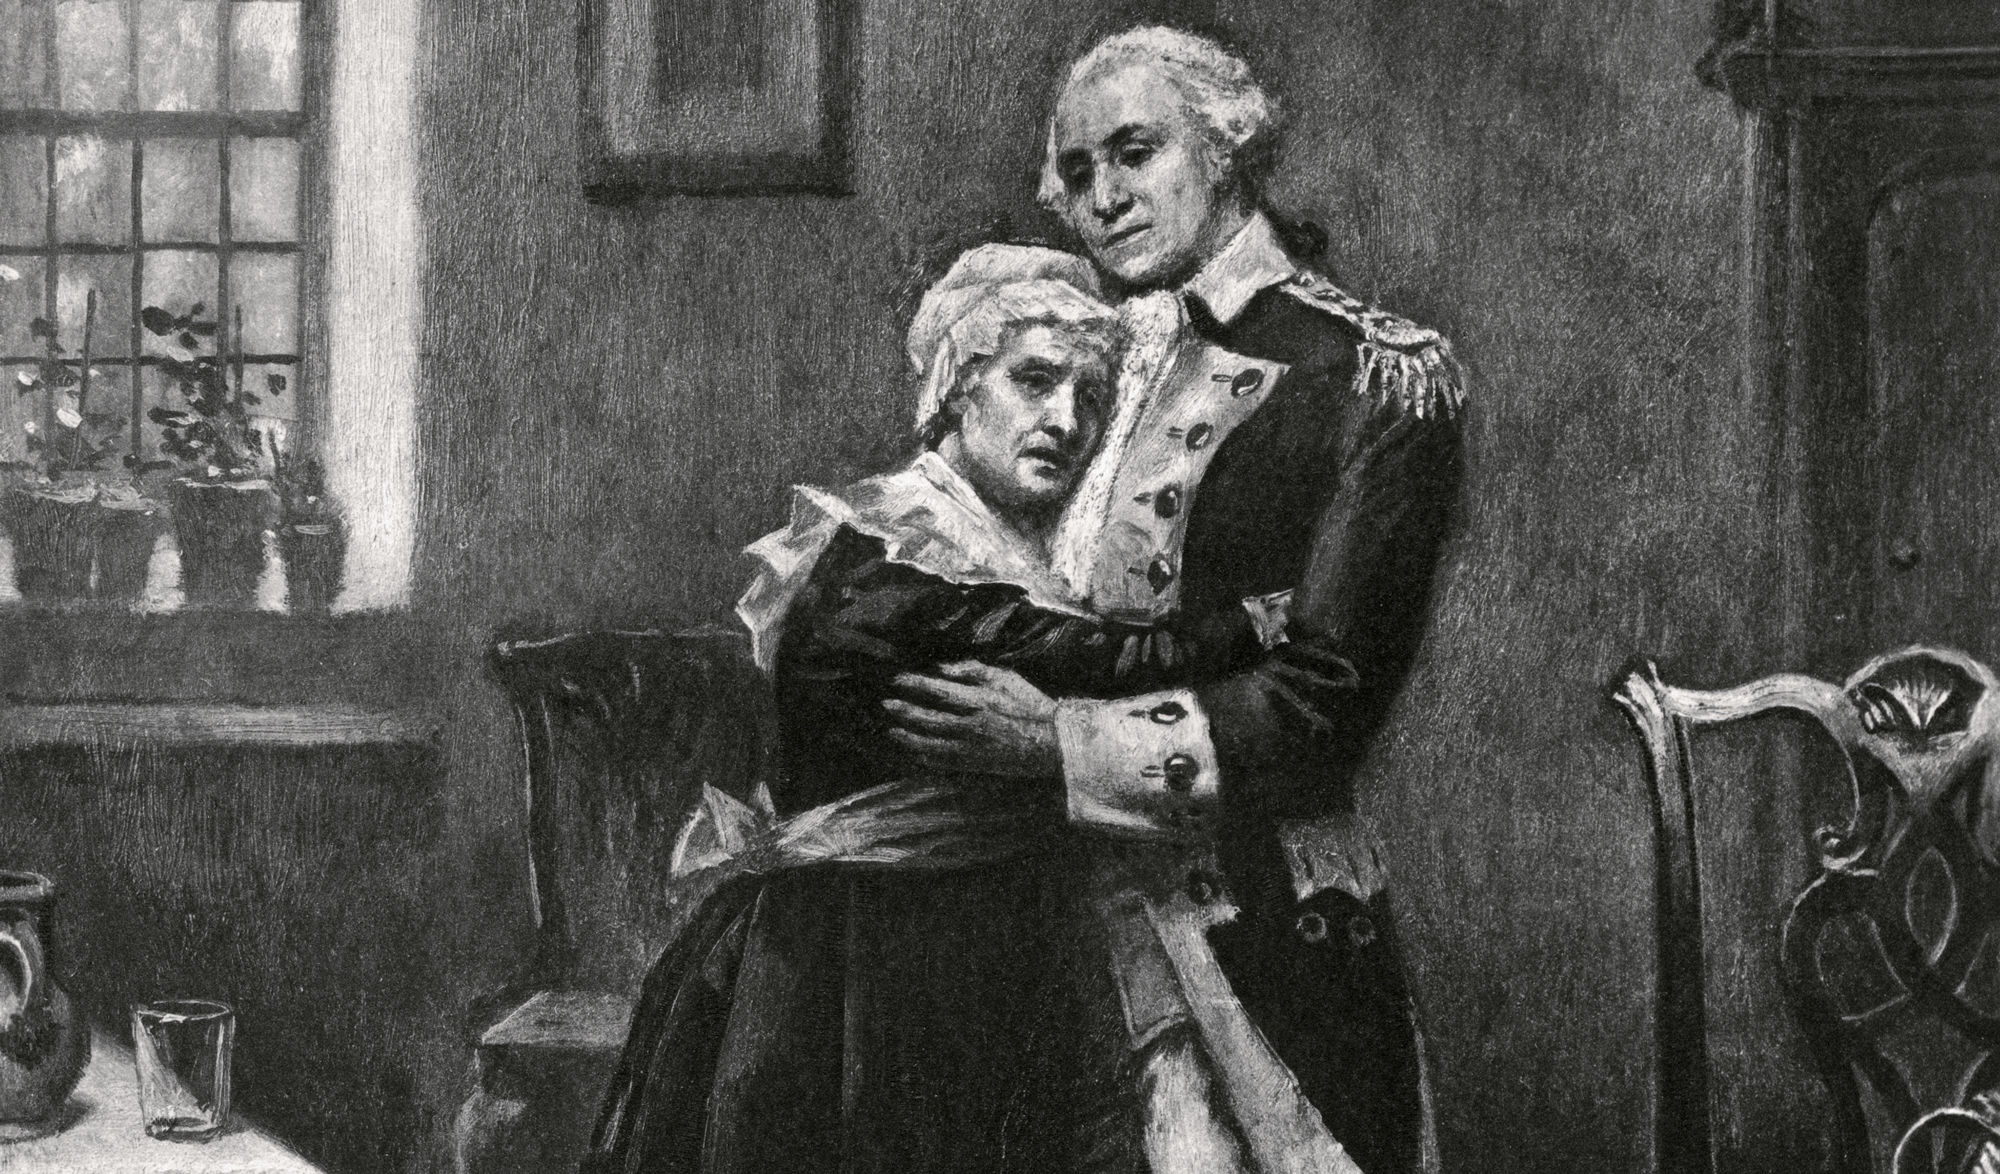 Read More: George Washington's Iron-Willed Single Mother